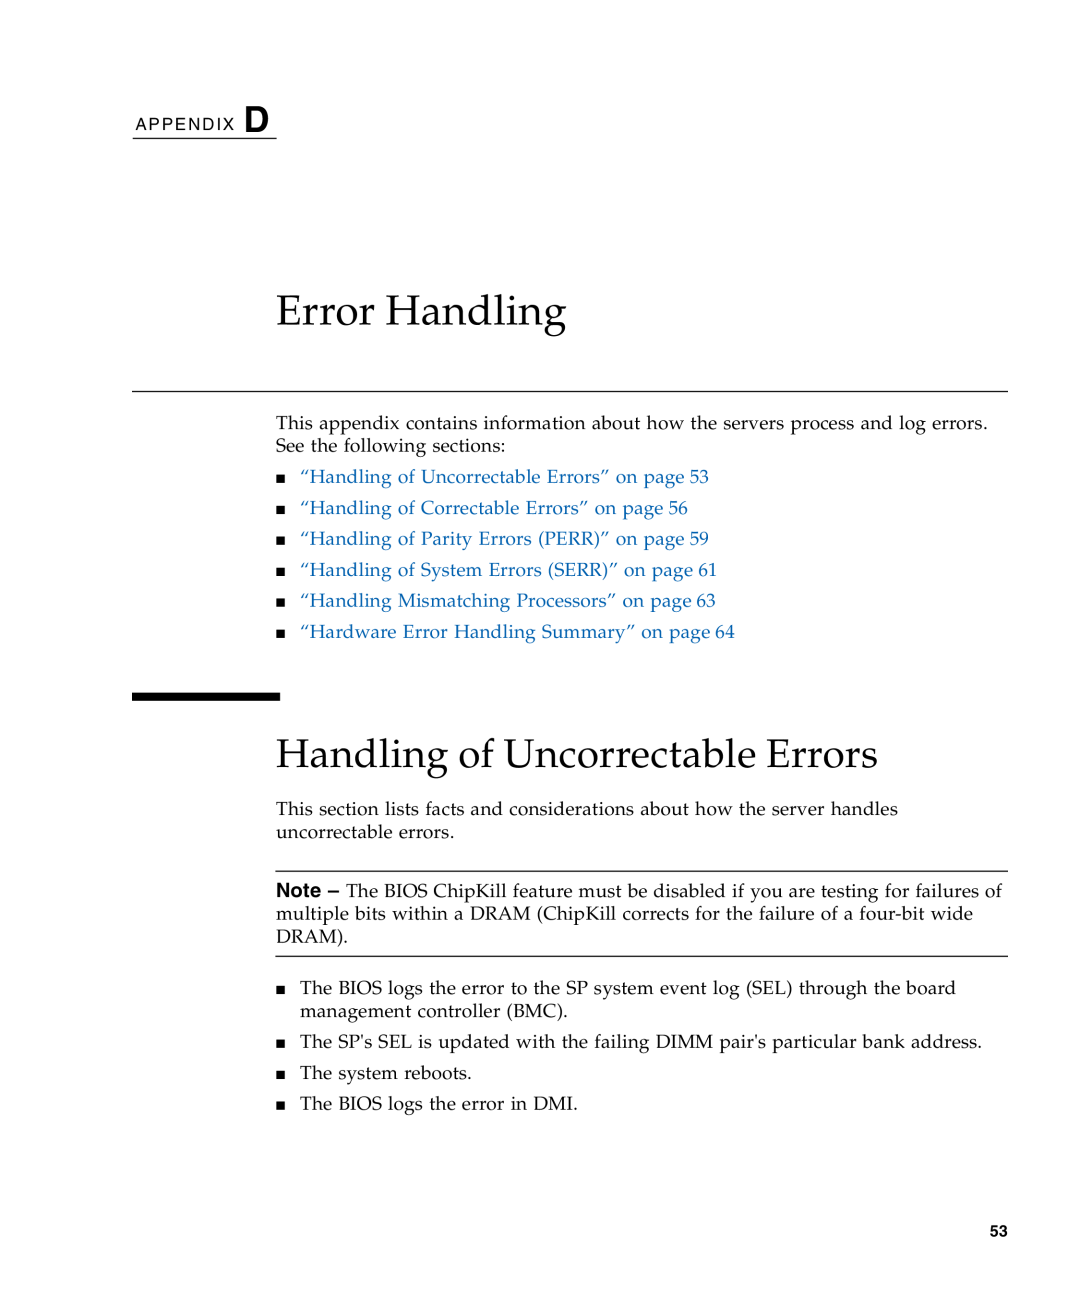 Sun Microsystems X4240, X4440, X4140 manual Error Handling, “Handling of Uncorrectable Errors” on page 